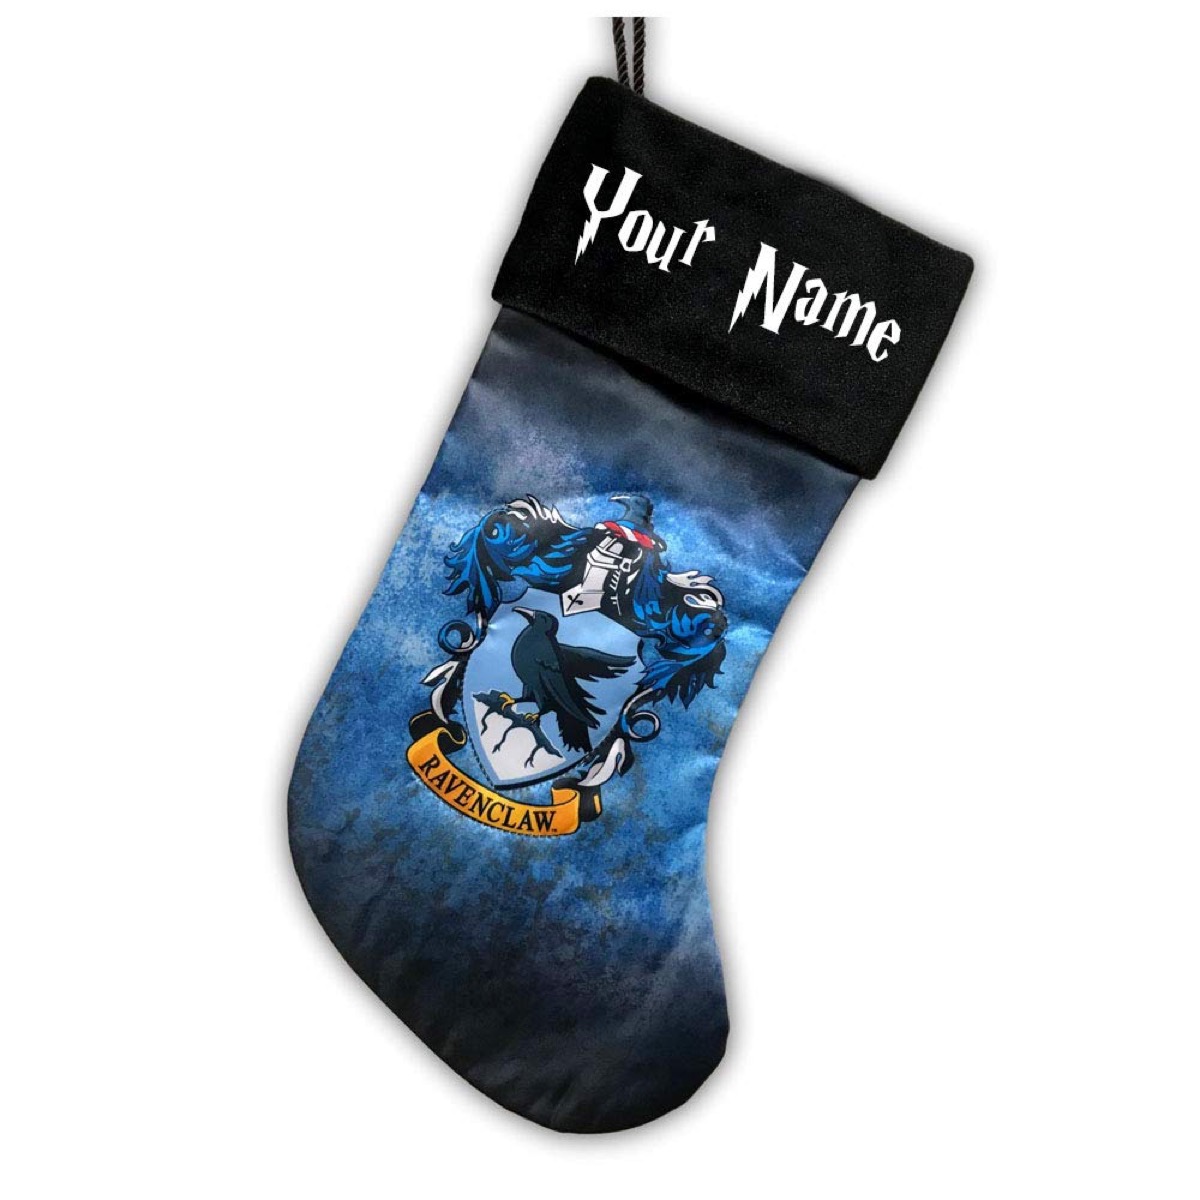 black stocking with harry potter image on it